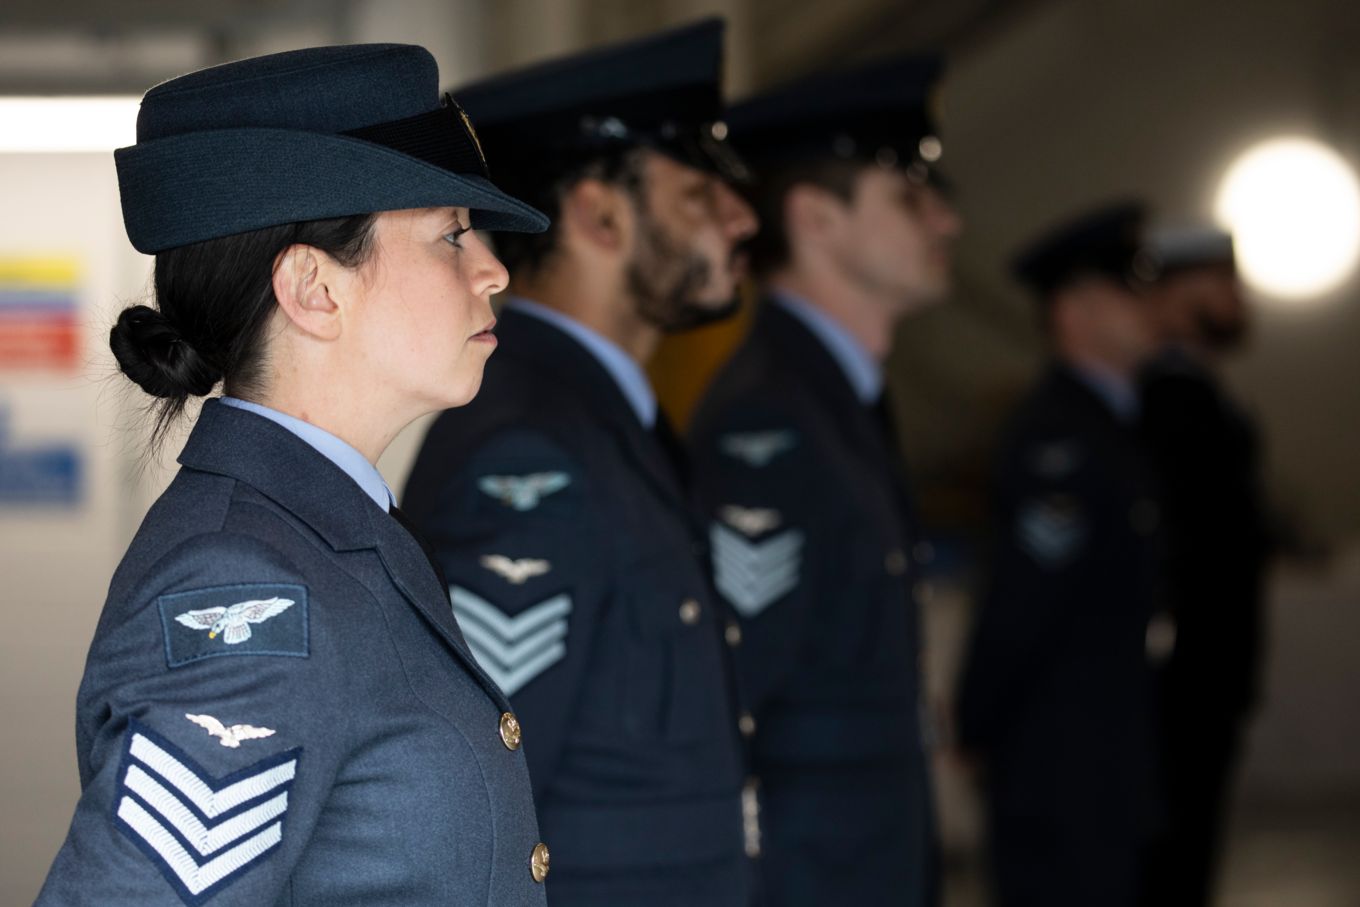 Image shows RAF personnel.